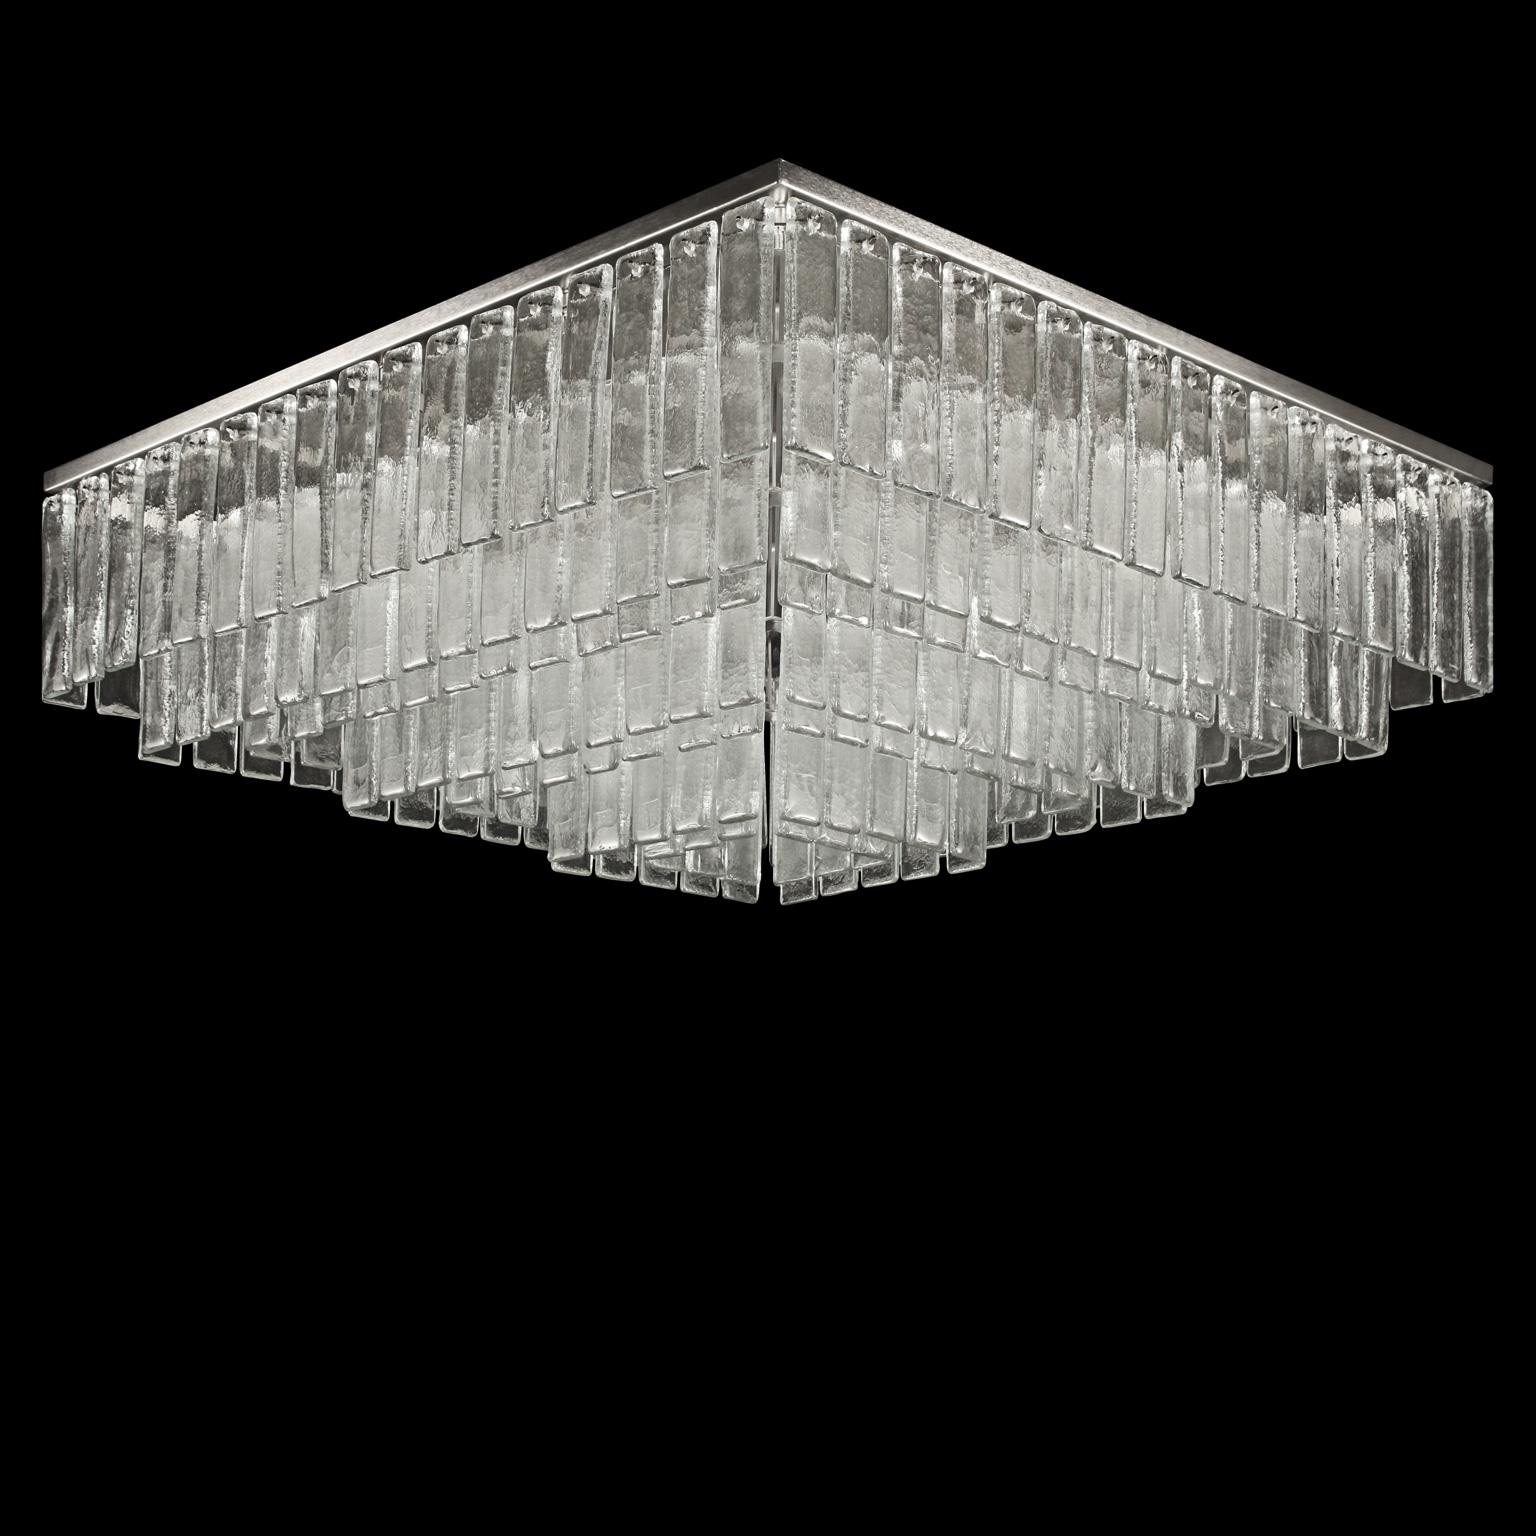 Charleston ceiling light, crystal glass listels, brushed nickel squared fixture by Multiforme
The modern style ceiling light Charleston, from our Progressive collection, is an extremely versatile lighting work that can be customized in many